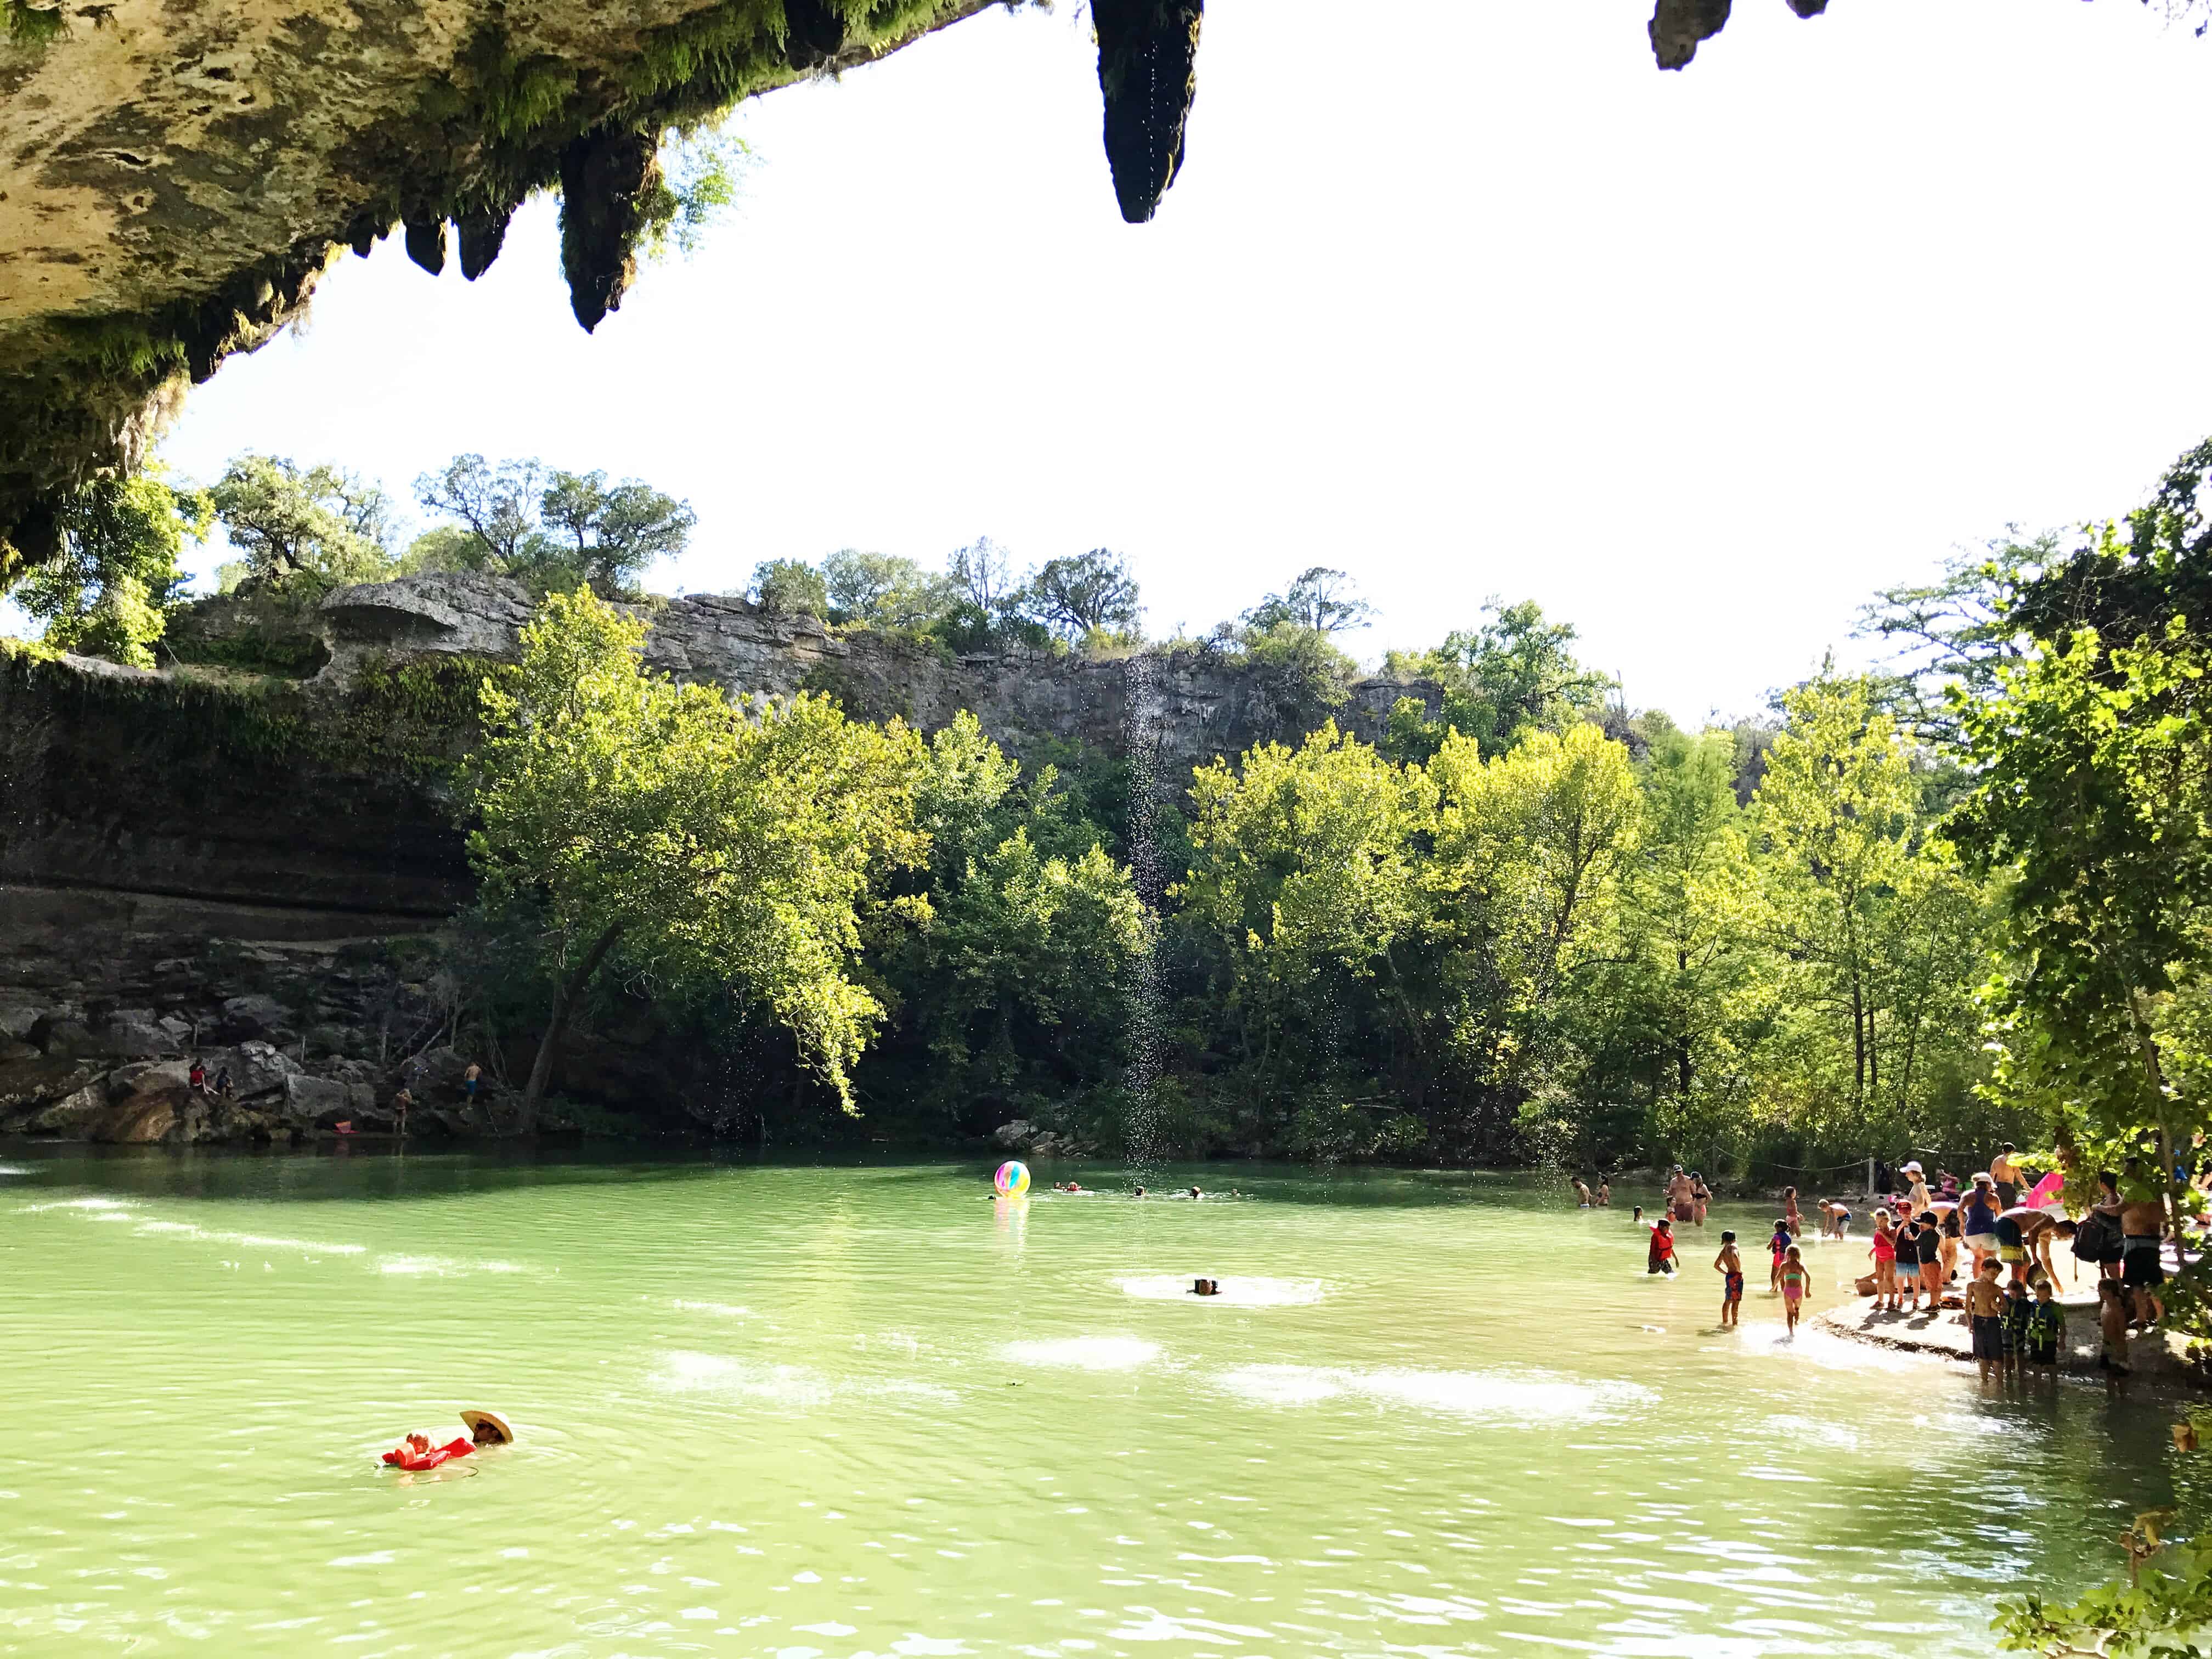 one of the things to do in Austin is to swim at Hamilton Pool